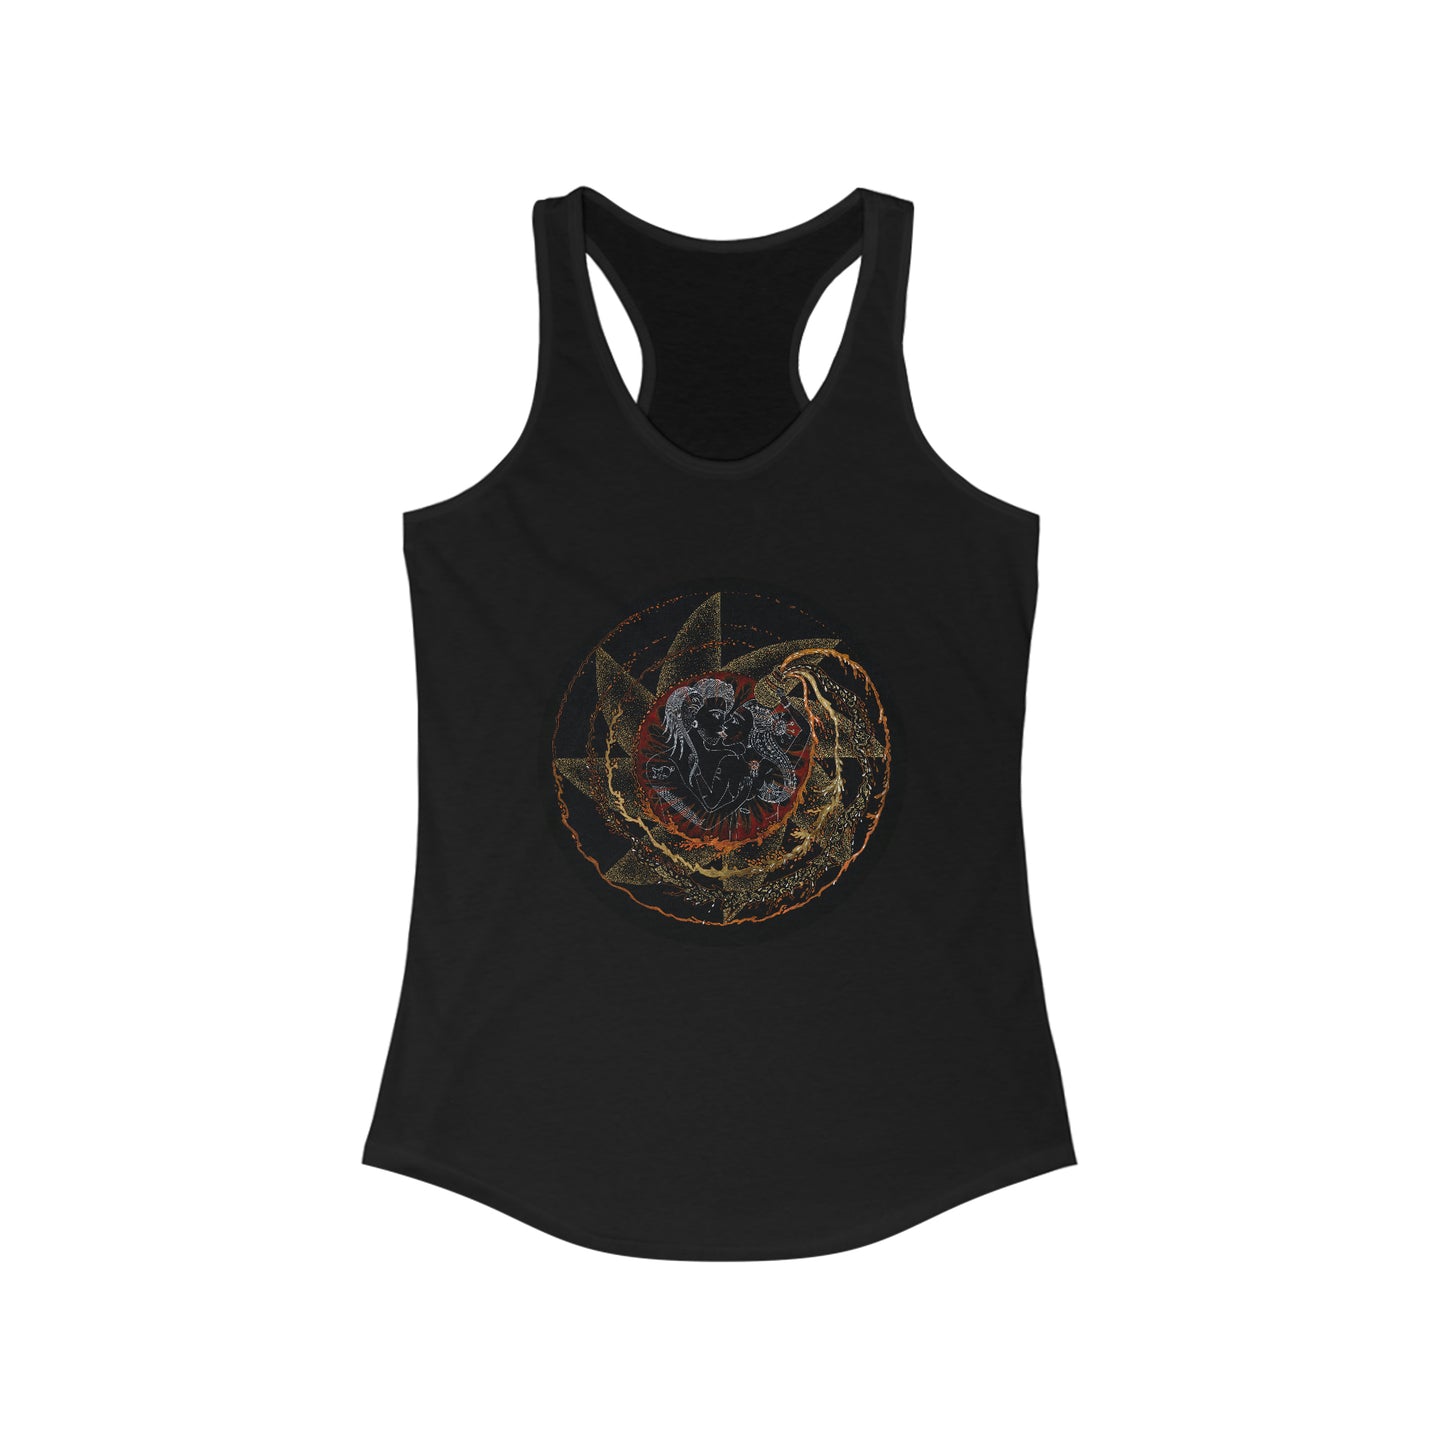 Chinese Zodiac Sign Tank Top (Pig)